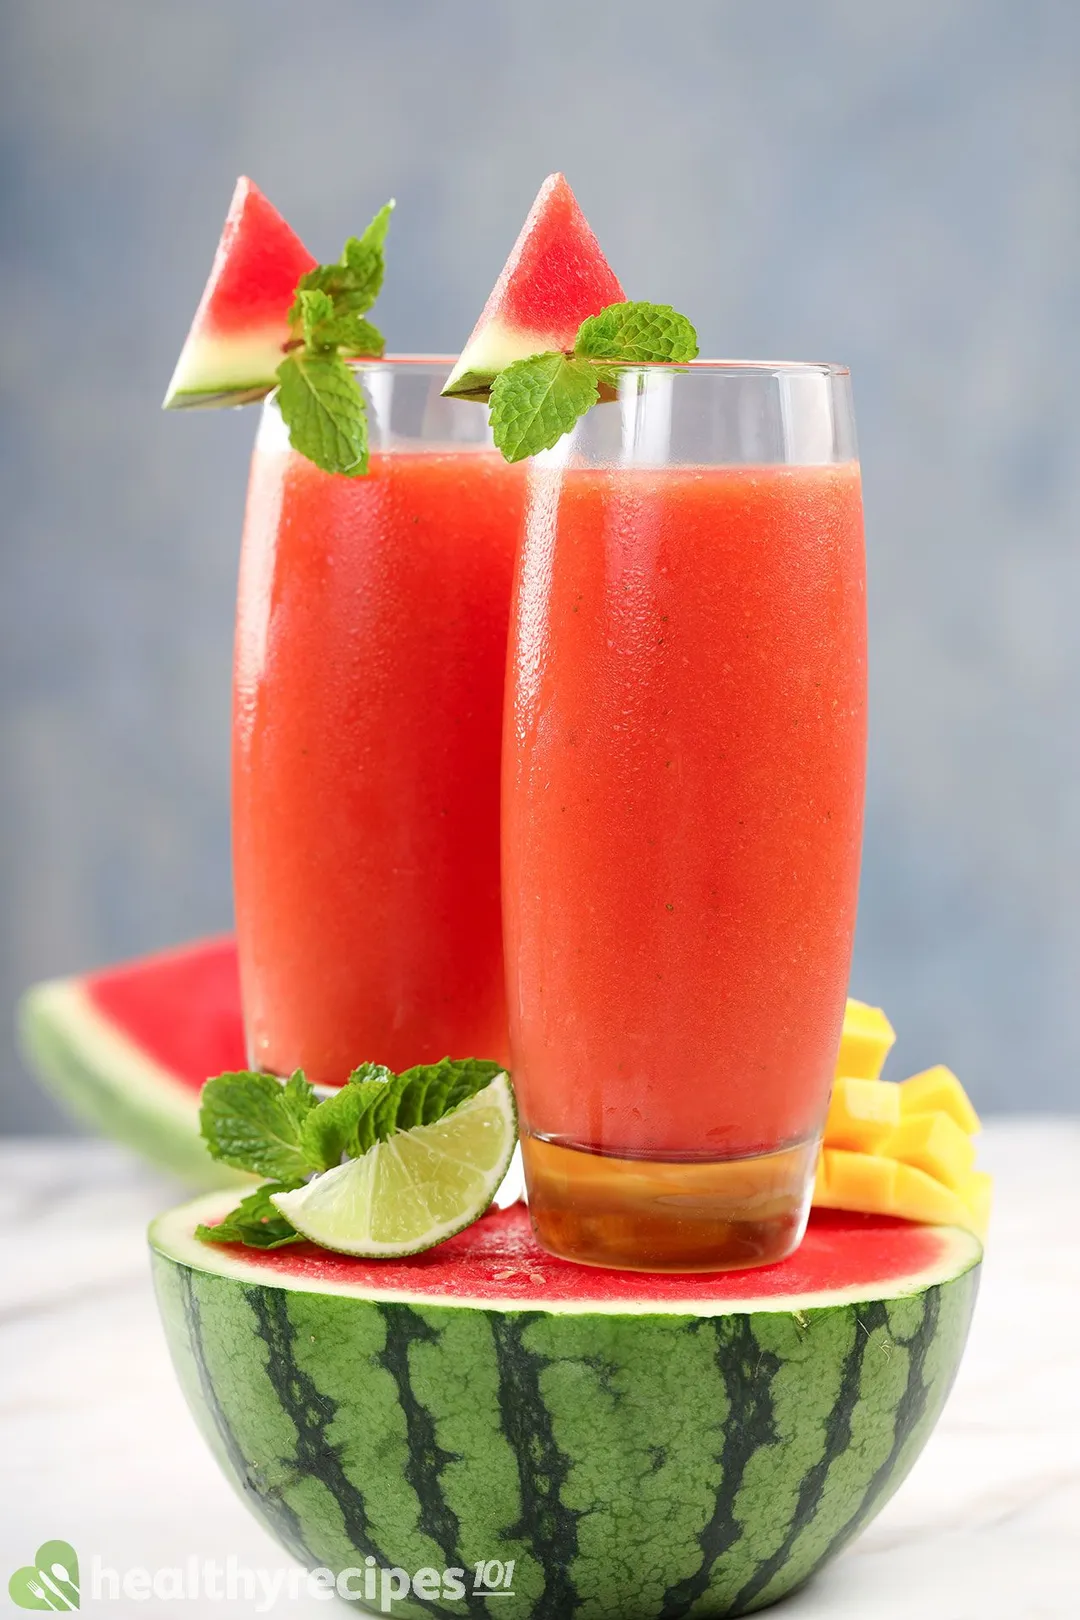 Two glasses of Mango Watermelon Smoothie, a lime wedge, and some mint leaves placed on half a watermelon.